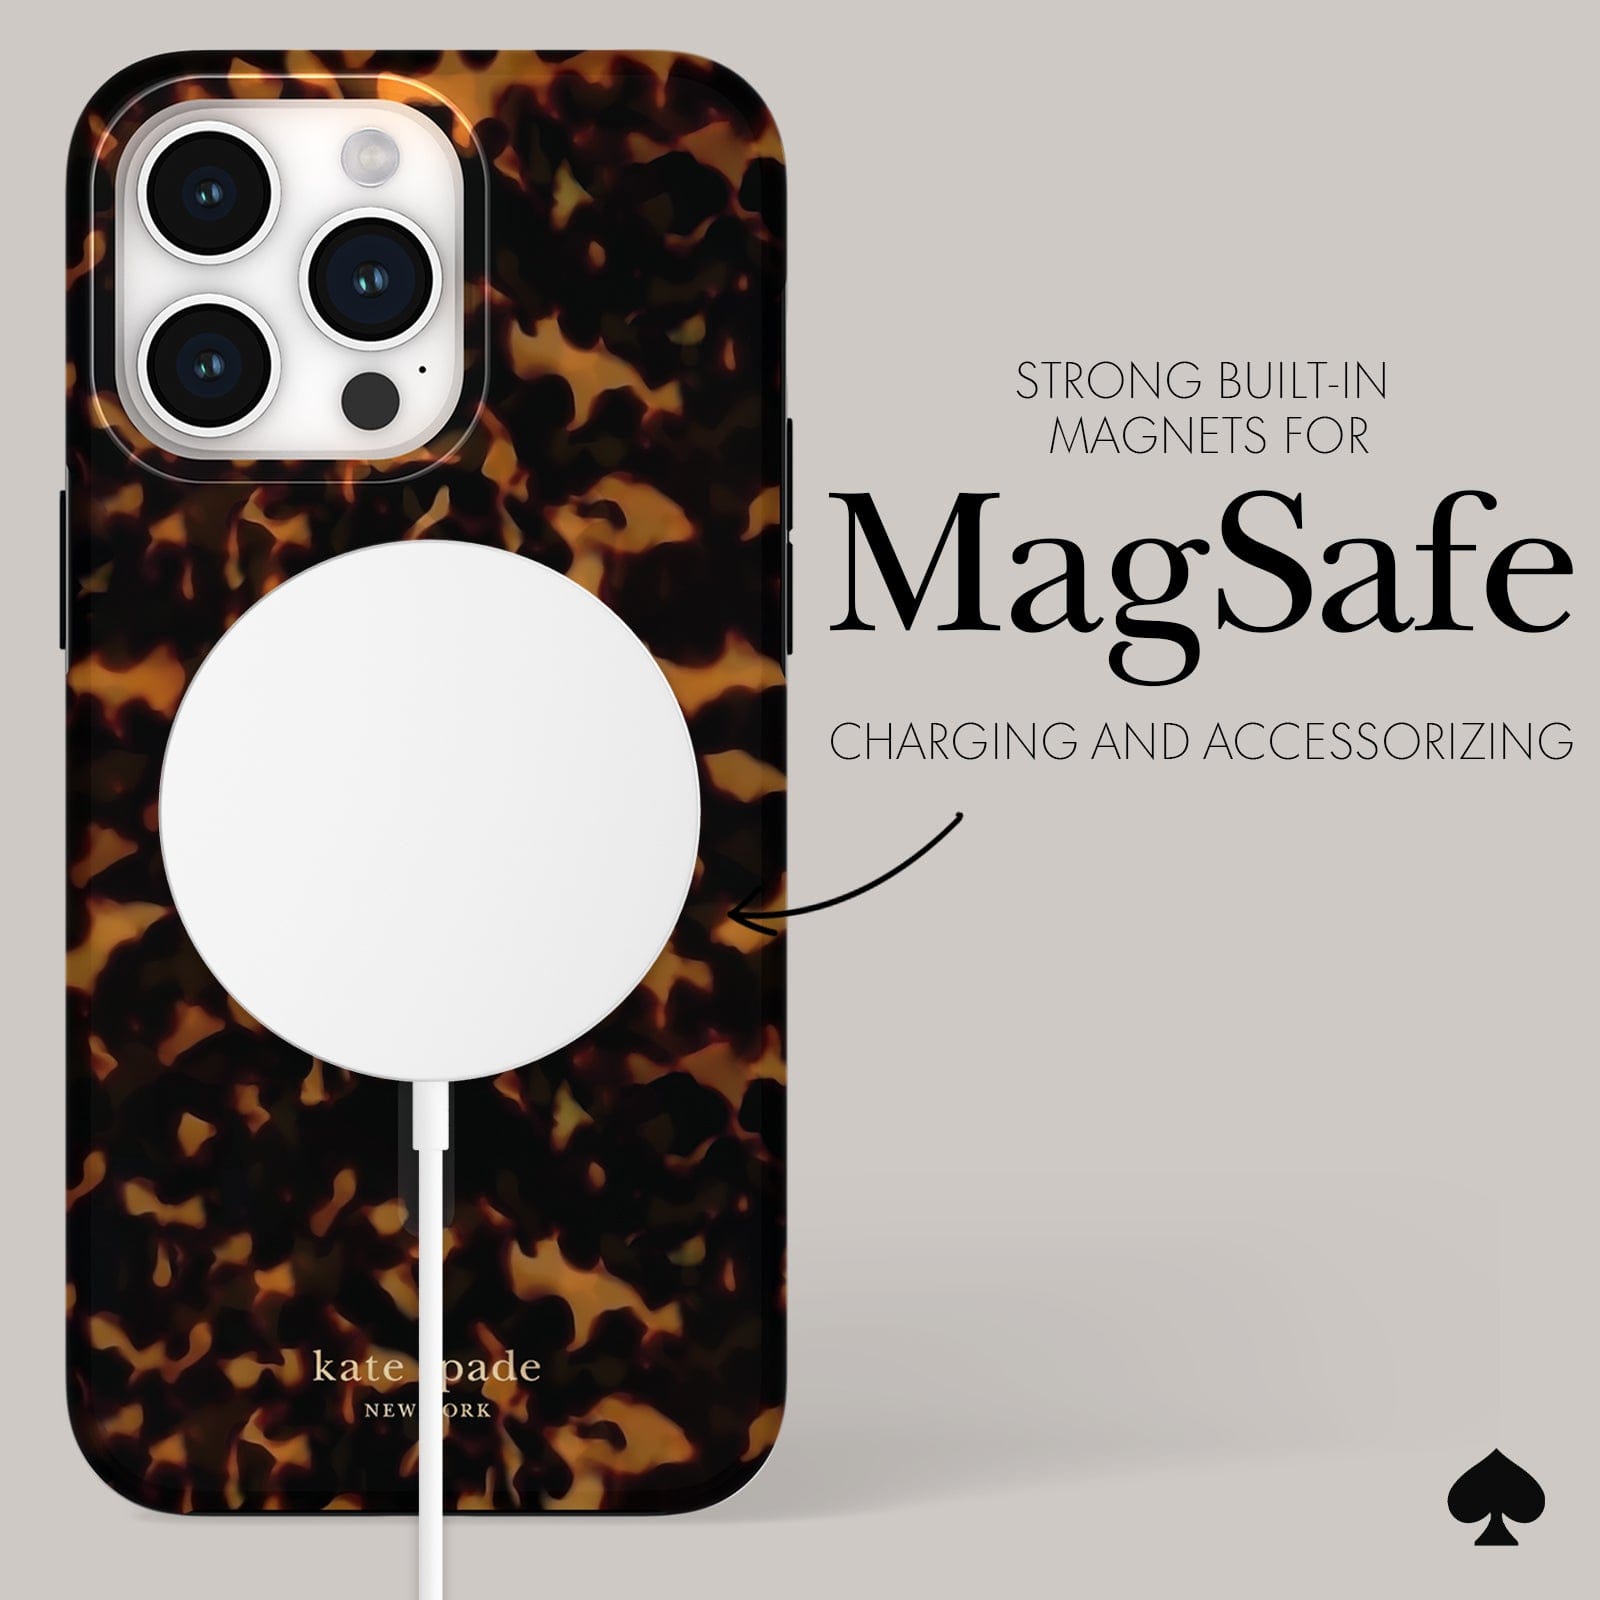 STRONG BUILT IN MAGNETS FOR EASY MAGSAFE ACCESSORIZING AND CHARGING.